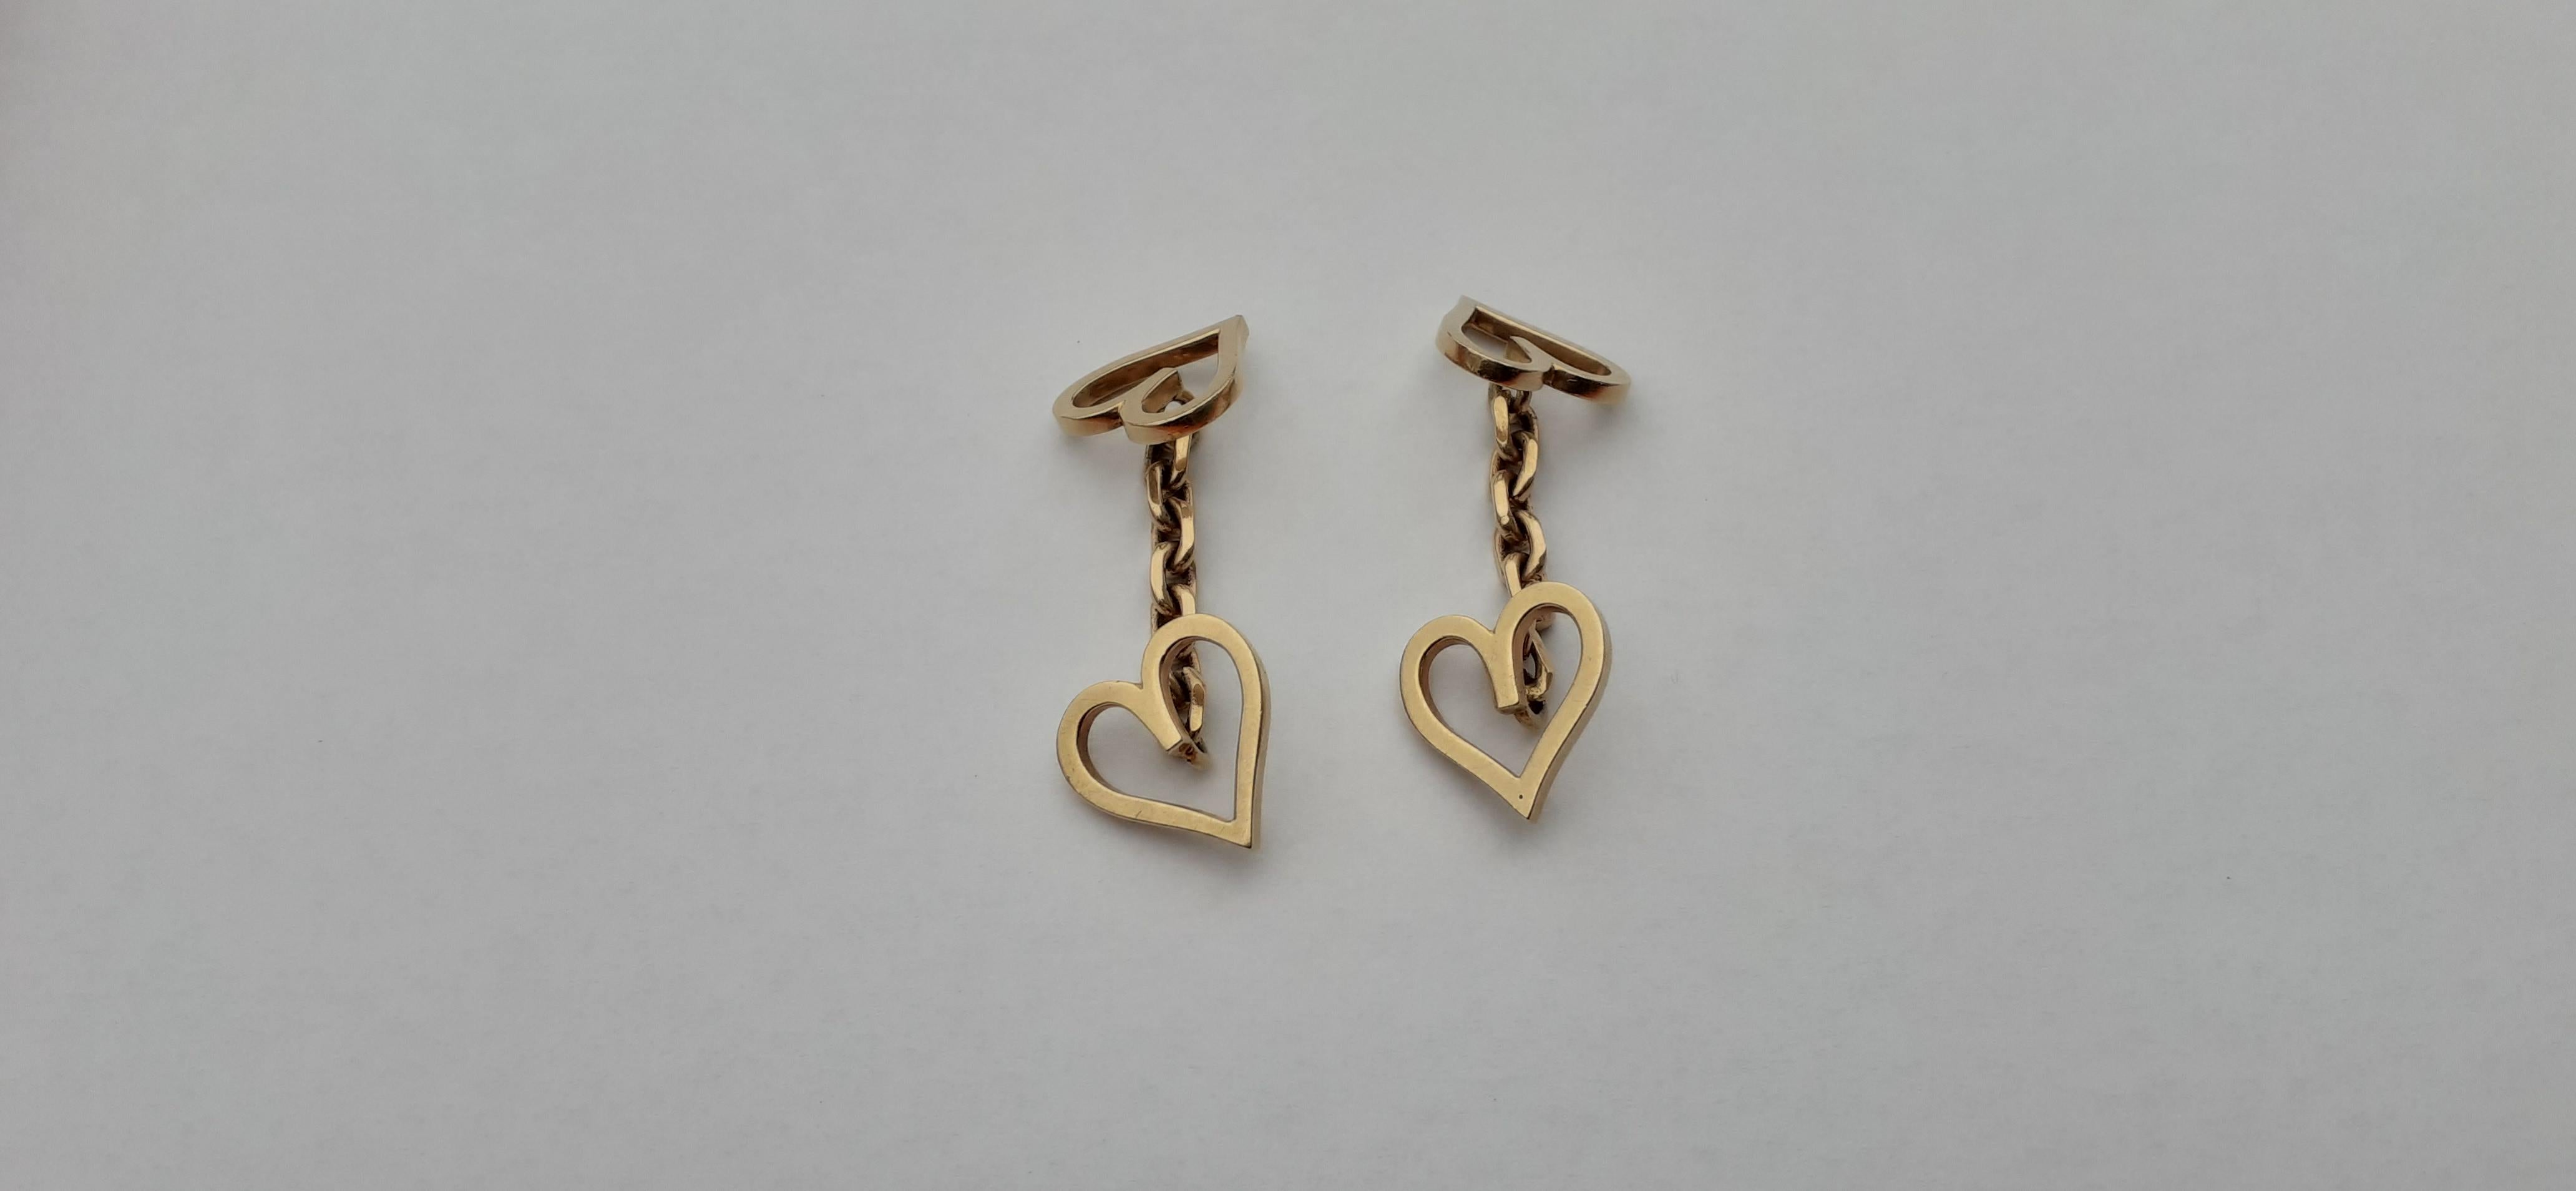 Exceptional Hermès Heart Shaped Cufflinks in Yellow Gold For Sale 1